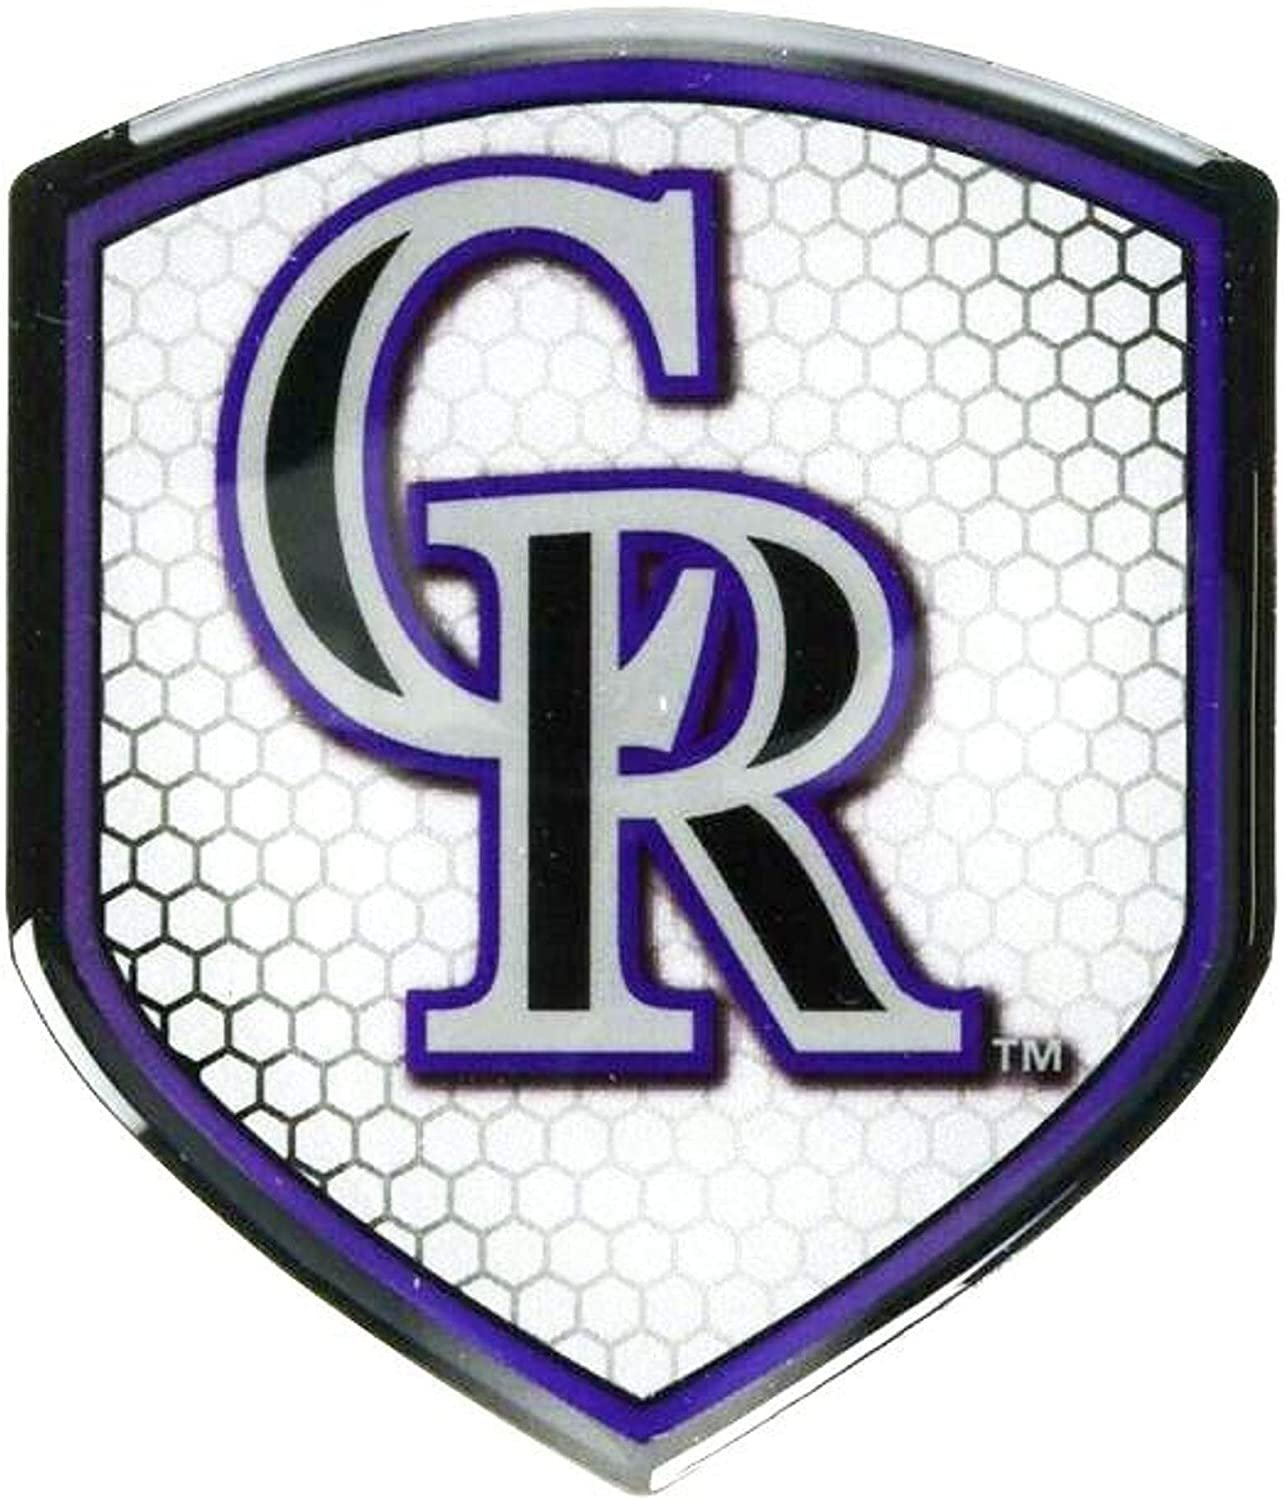 Colorado Rockies High Intensity Reflector, Shield Shape, Raised Decal Sticker, 2.5x3.5 Inch, Home or Auto, Full Adhesive Backing